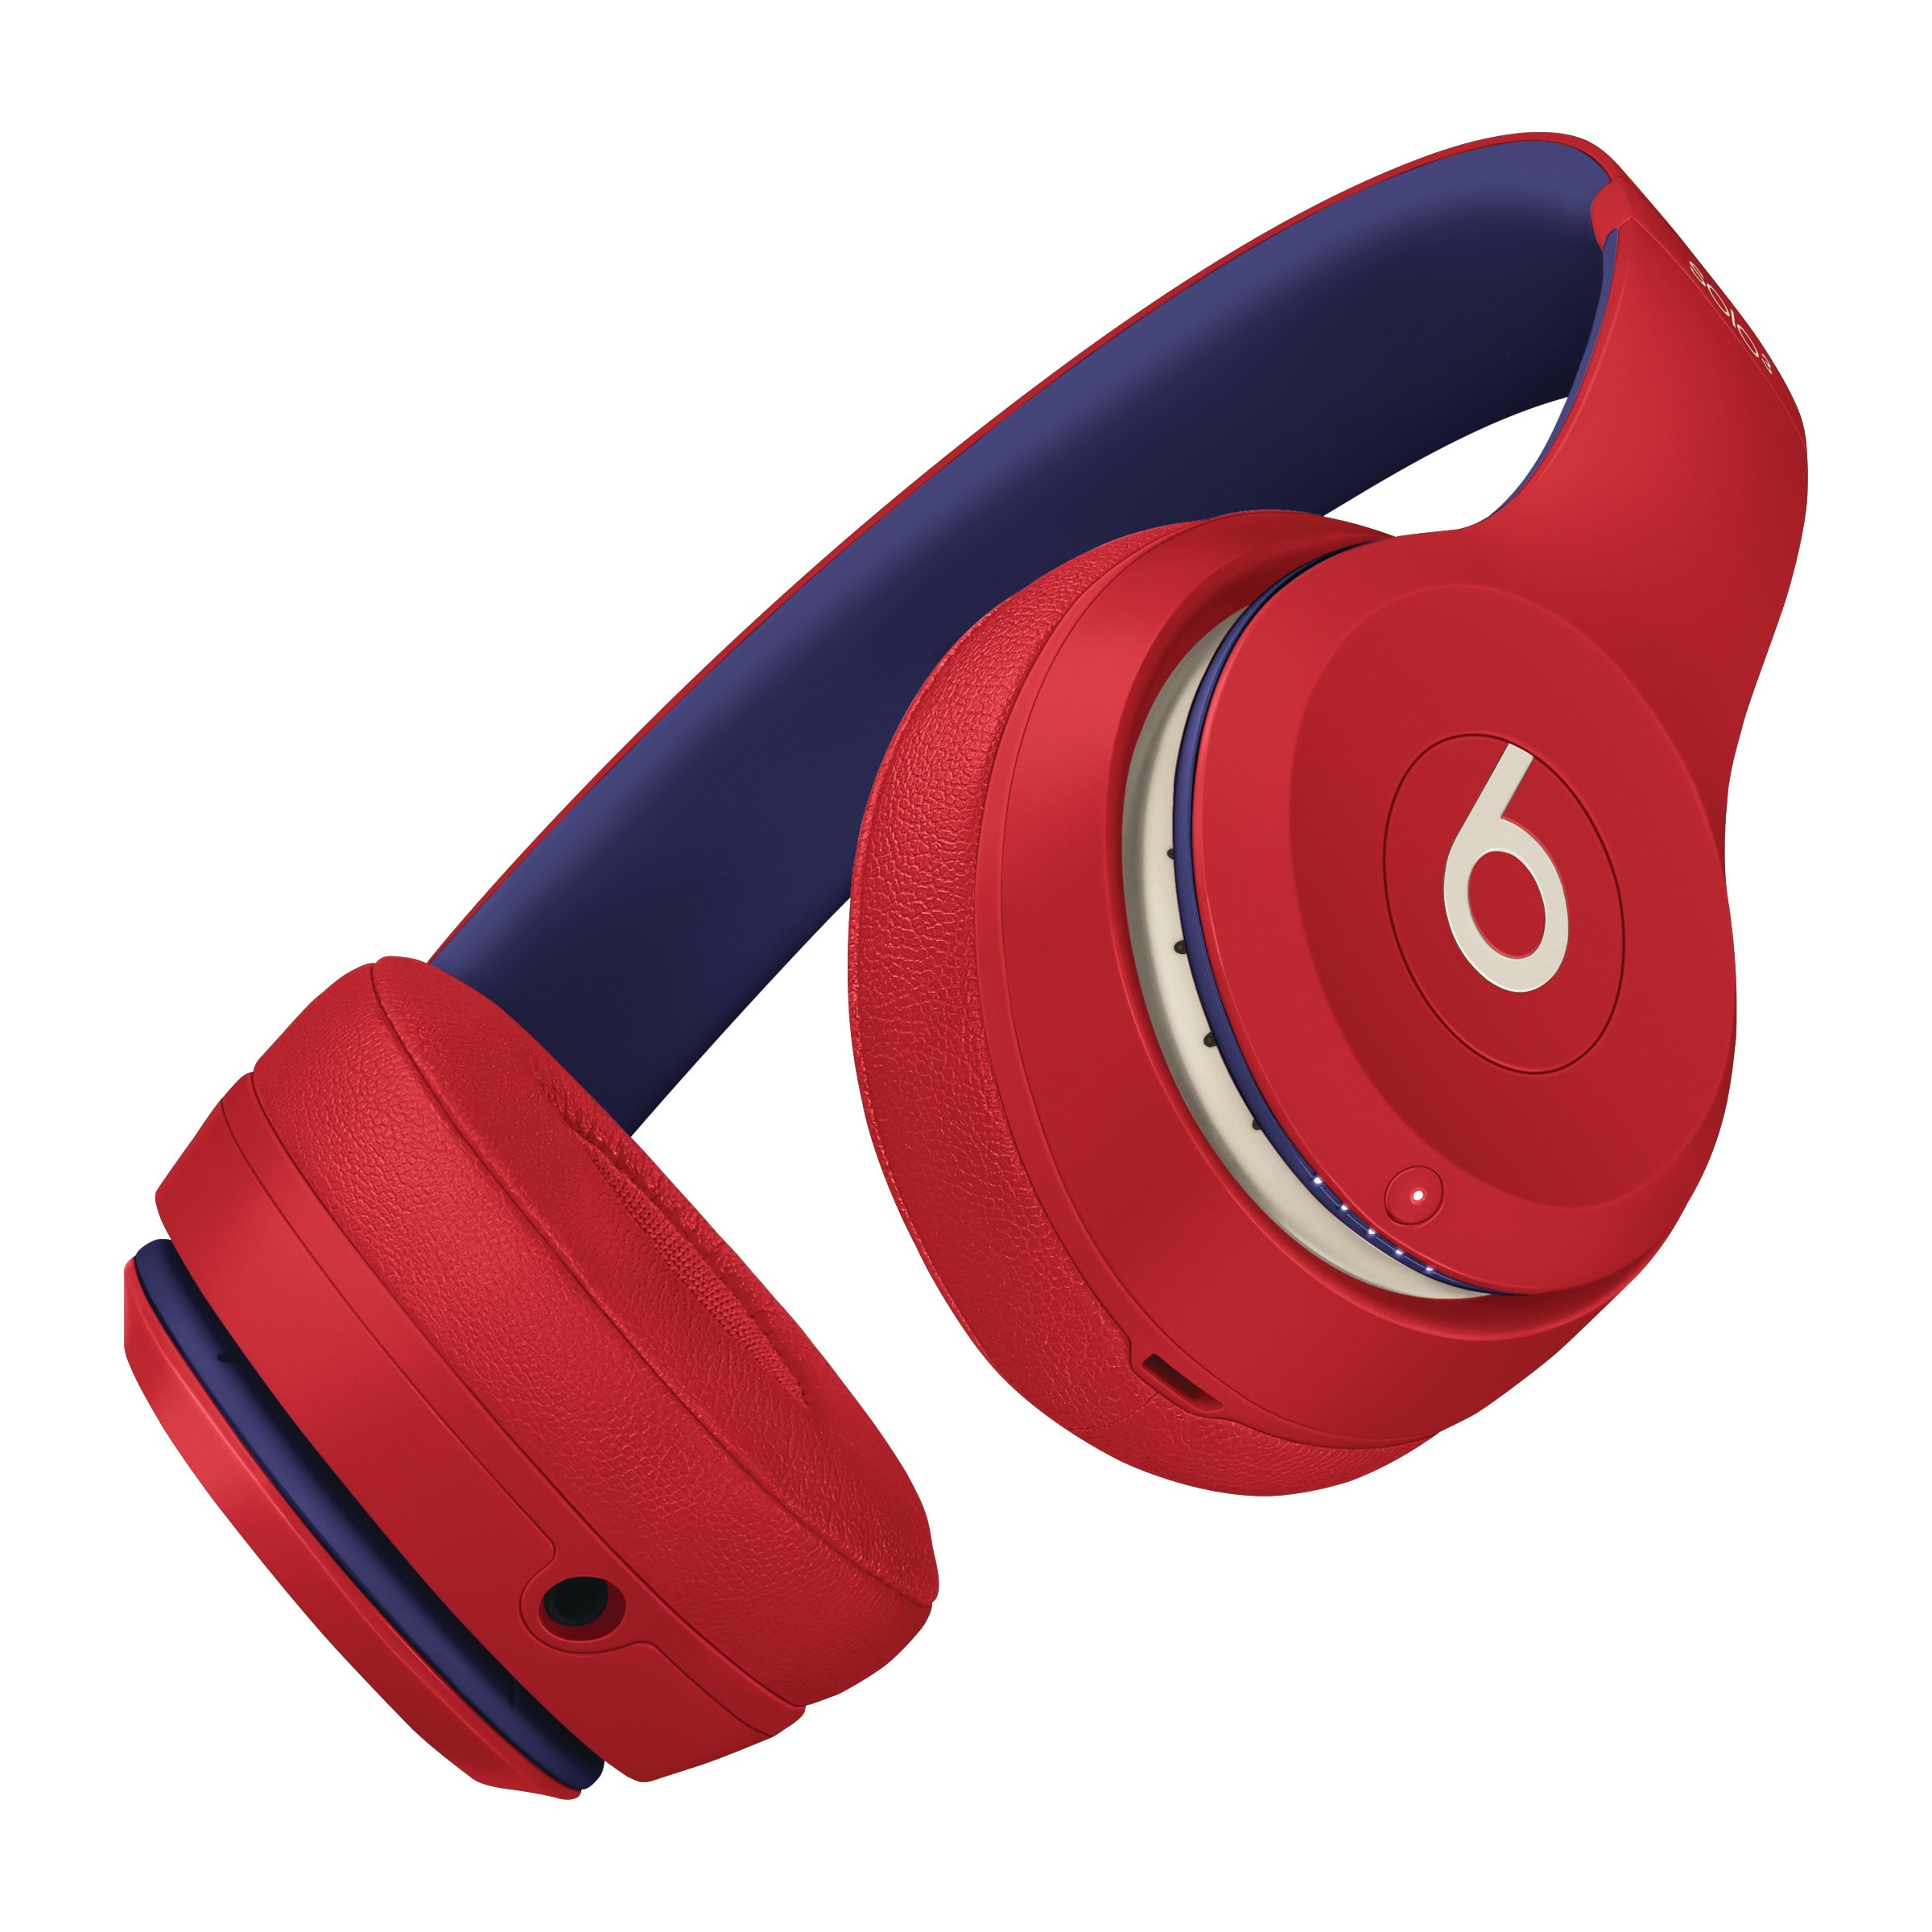 Beats Solo3 Wireless Headphones - The Club Collection